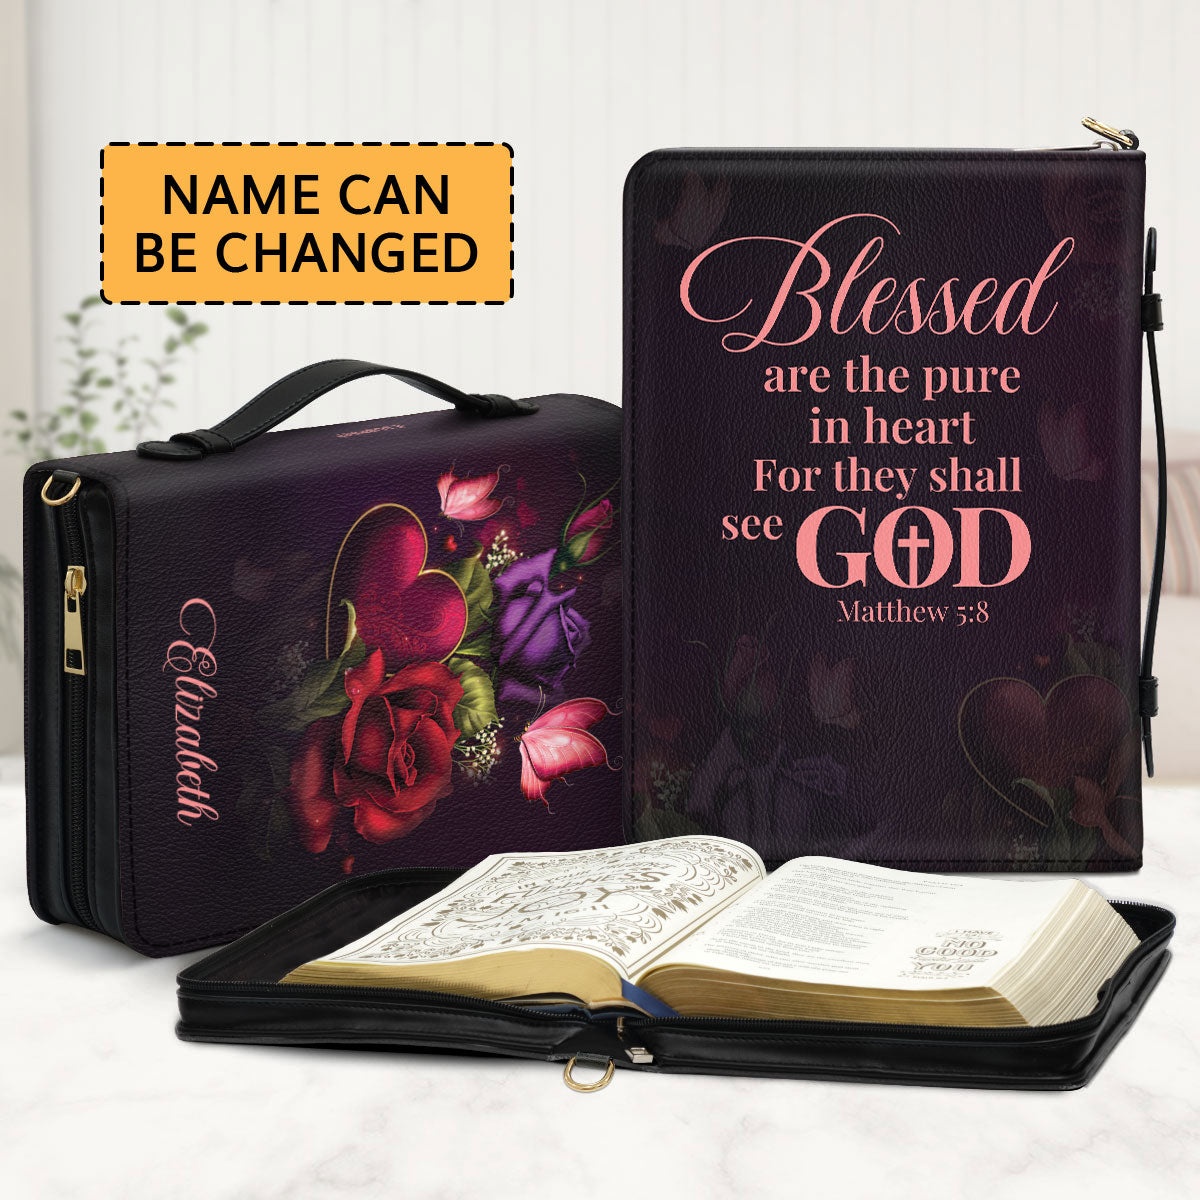 Blessed Are The Pure In Heart For They Shall See God - Pretty Personalized Bible Cover NUH472A